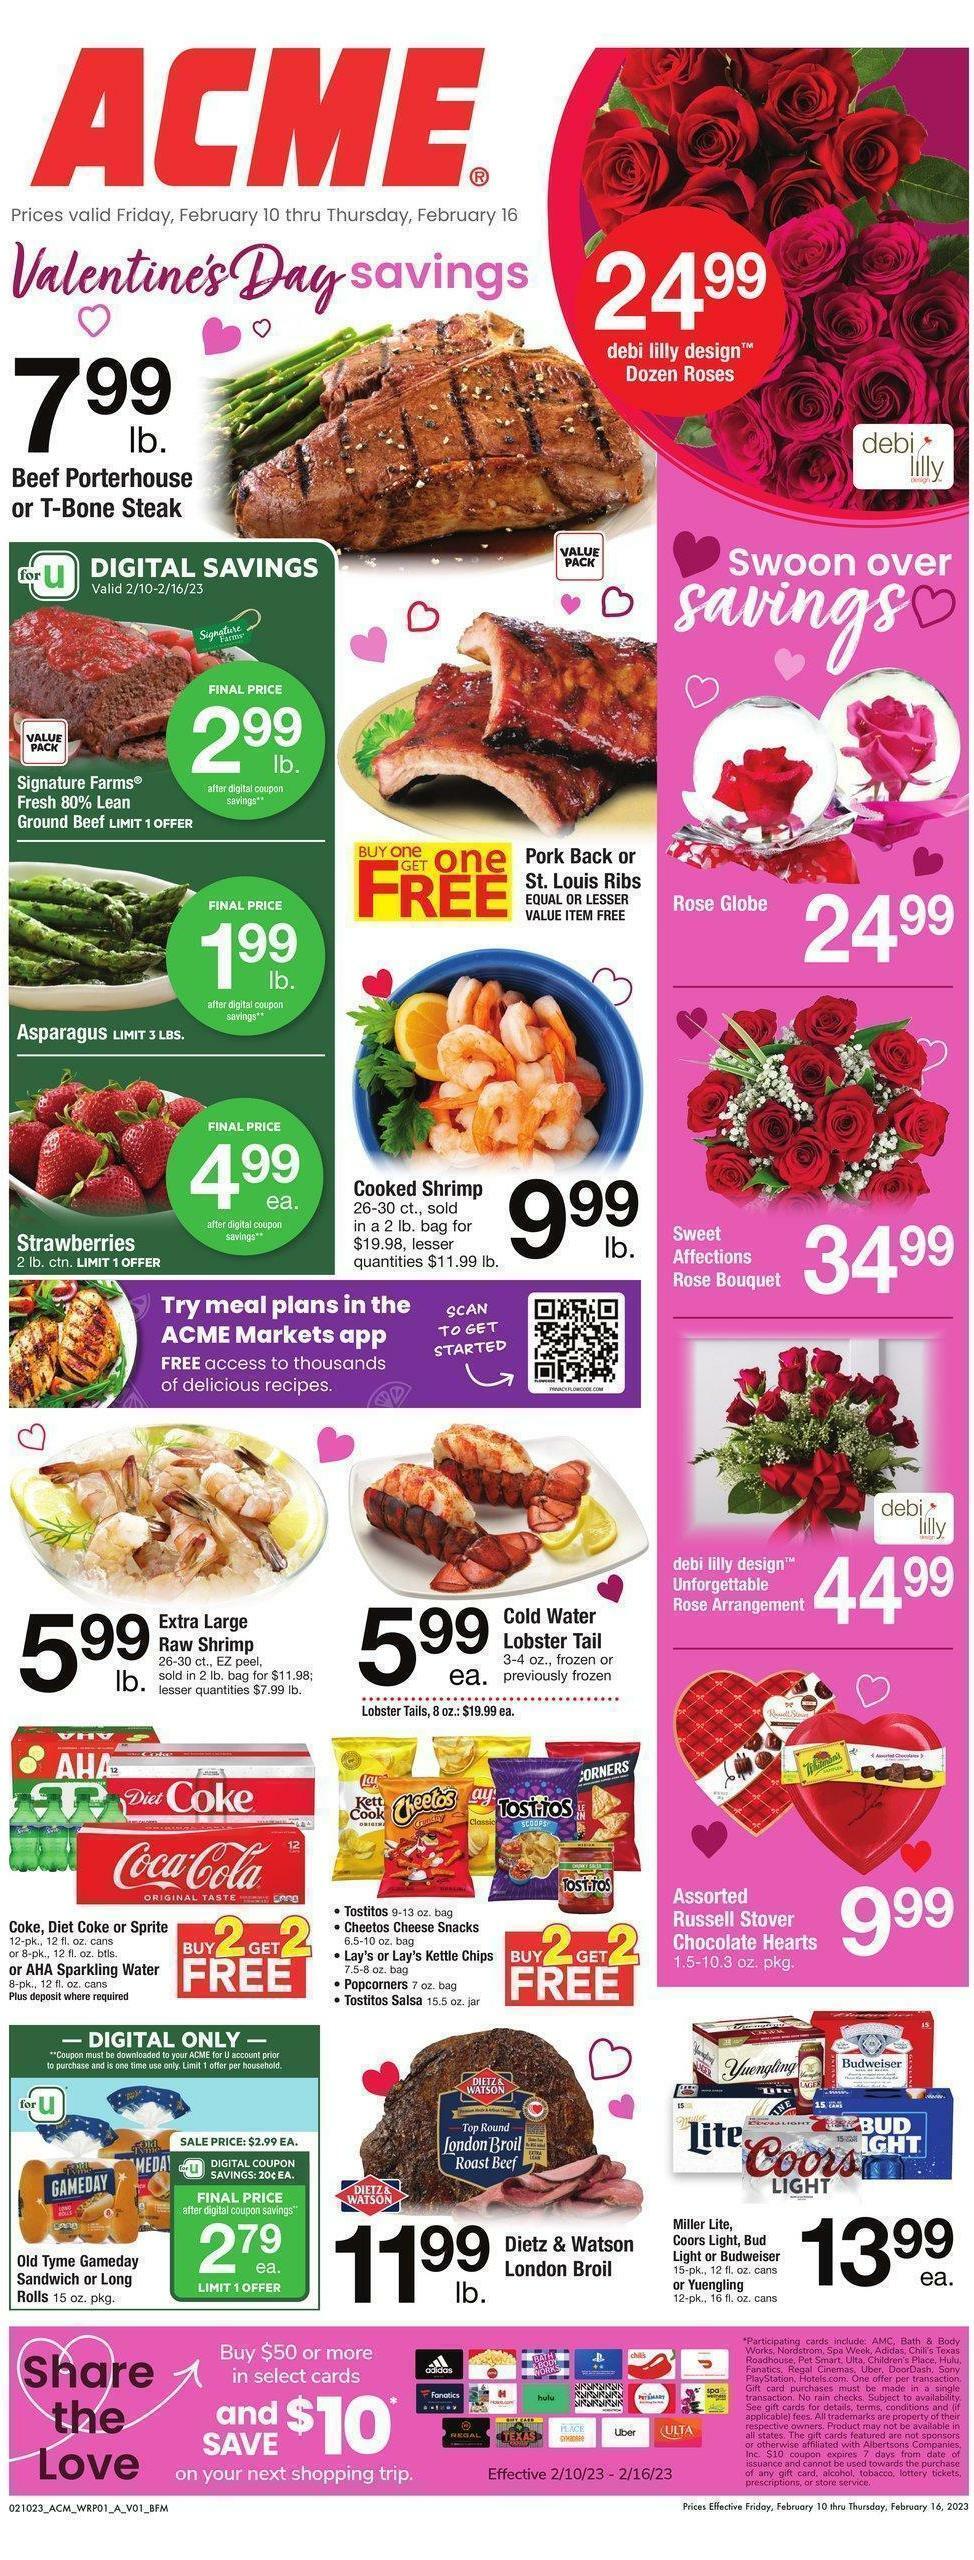 ACME Markets Weekly Ad from February 10